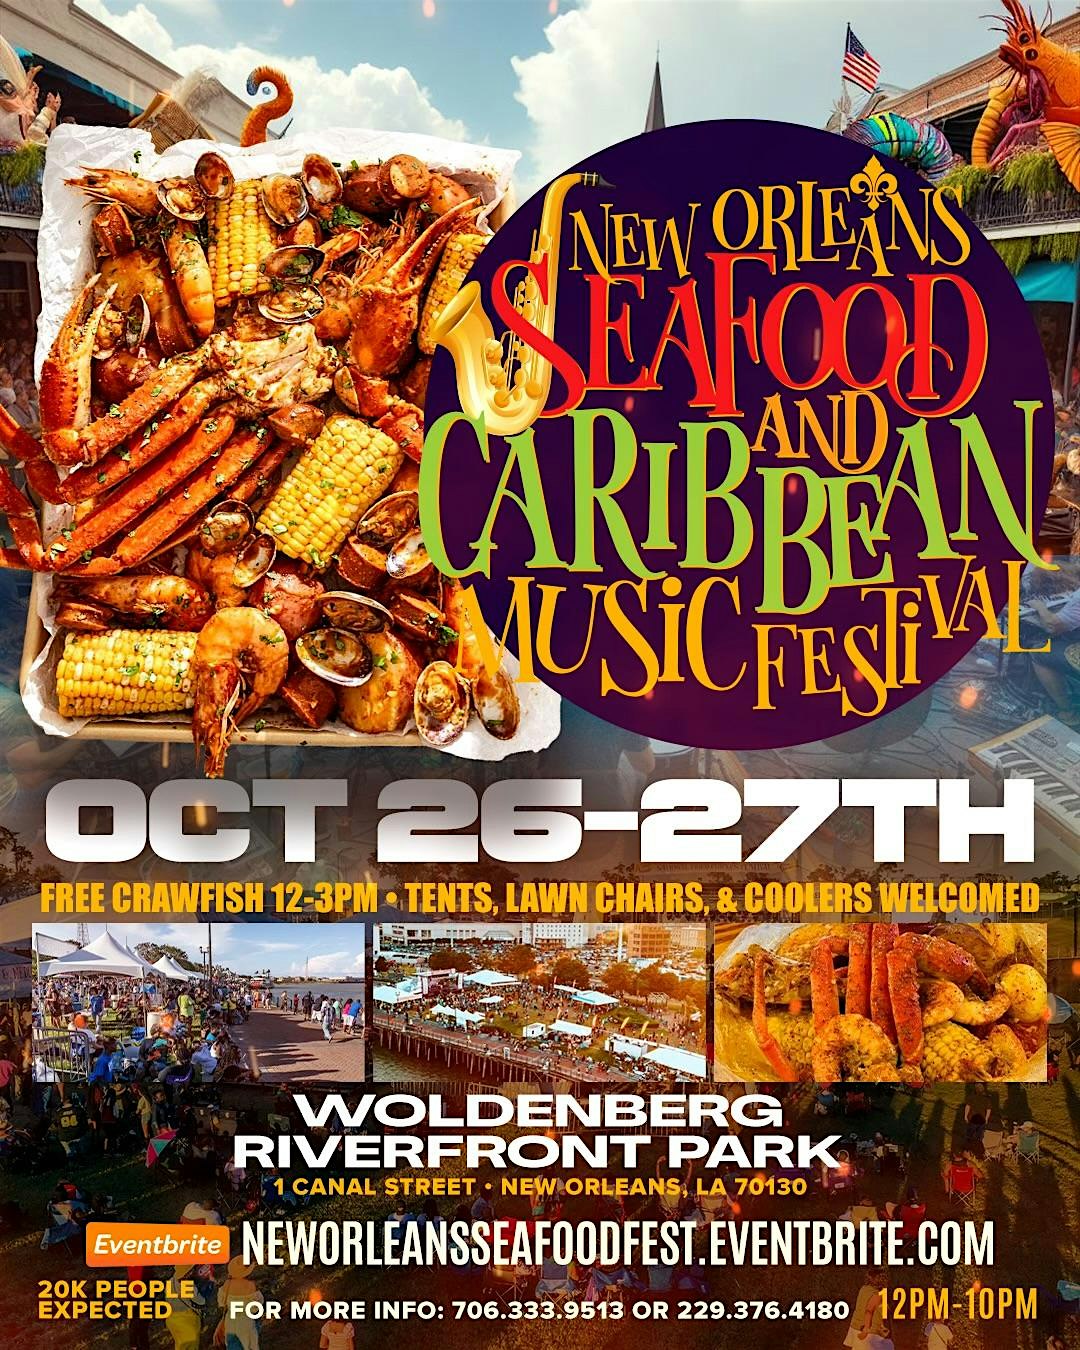 New Orleans Seafood & Caribbean Music Festival – New Orleans, LA